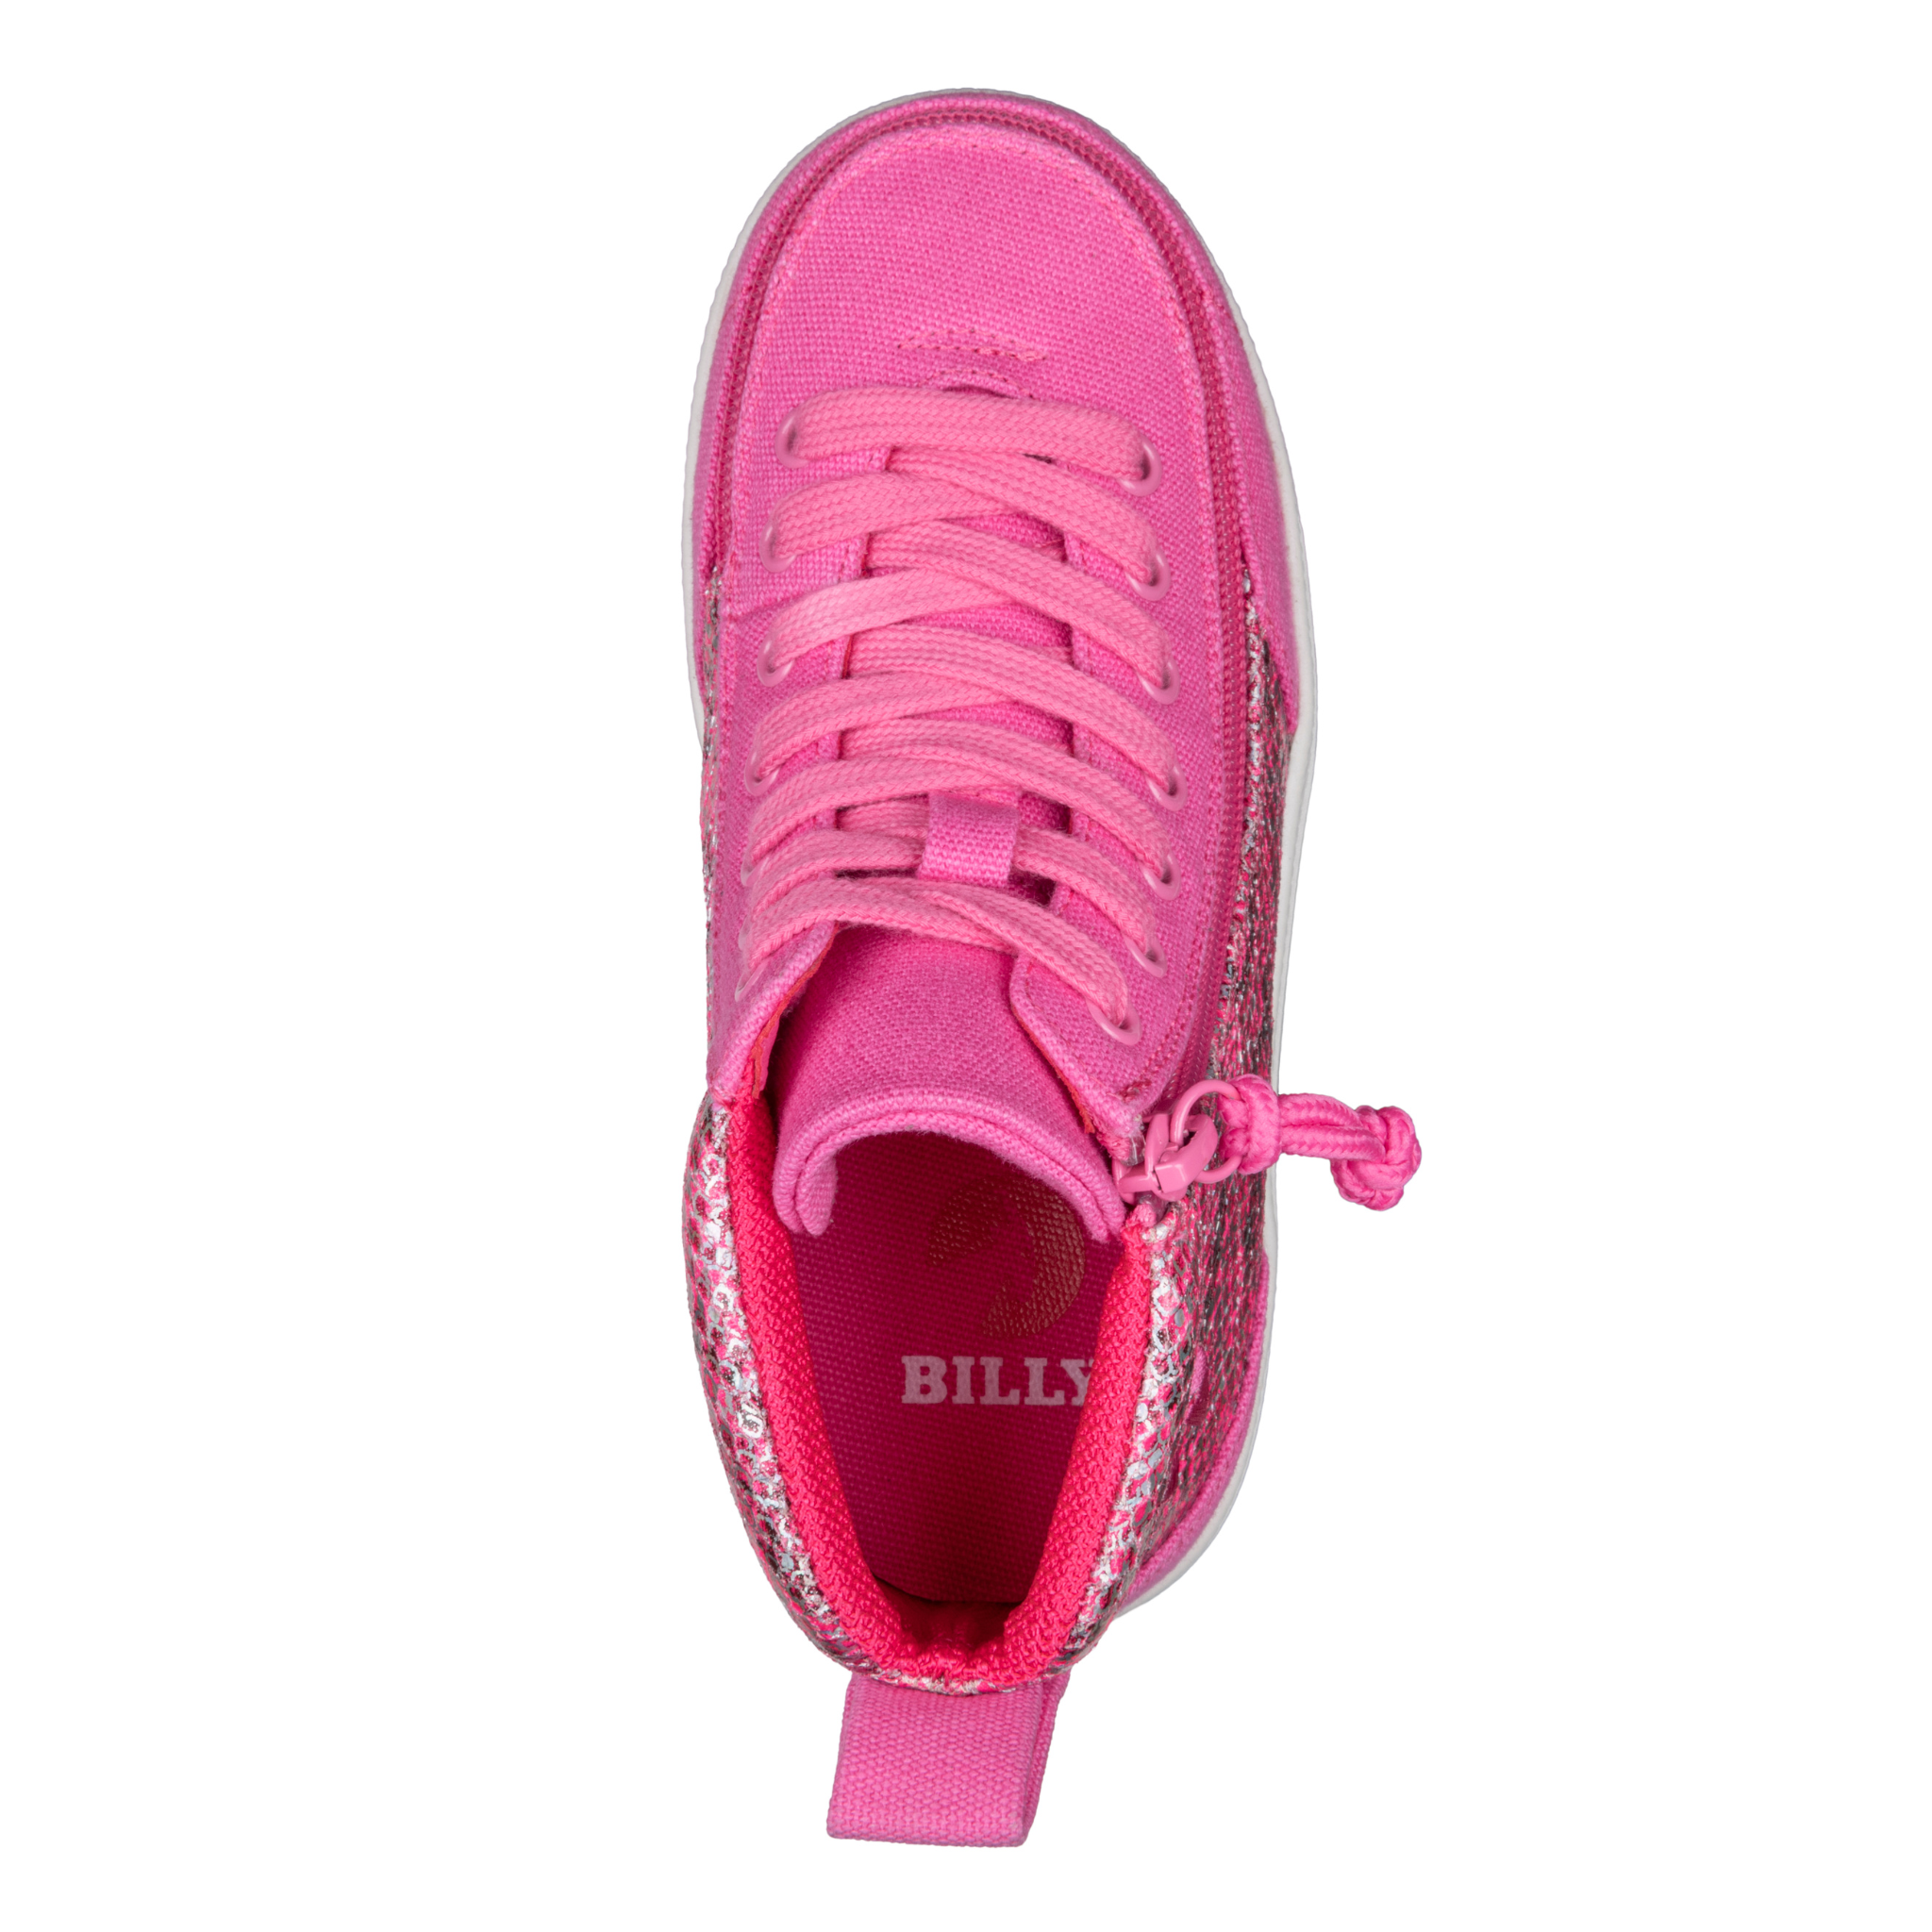 Billy Footwear (Toddlers)  - High Top D|R Fuchsia Snake Canvas Shoes